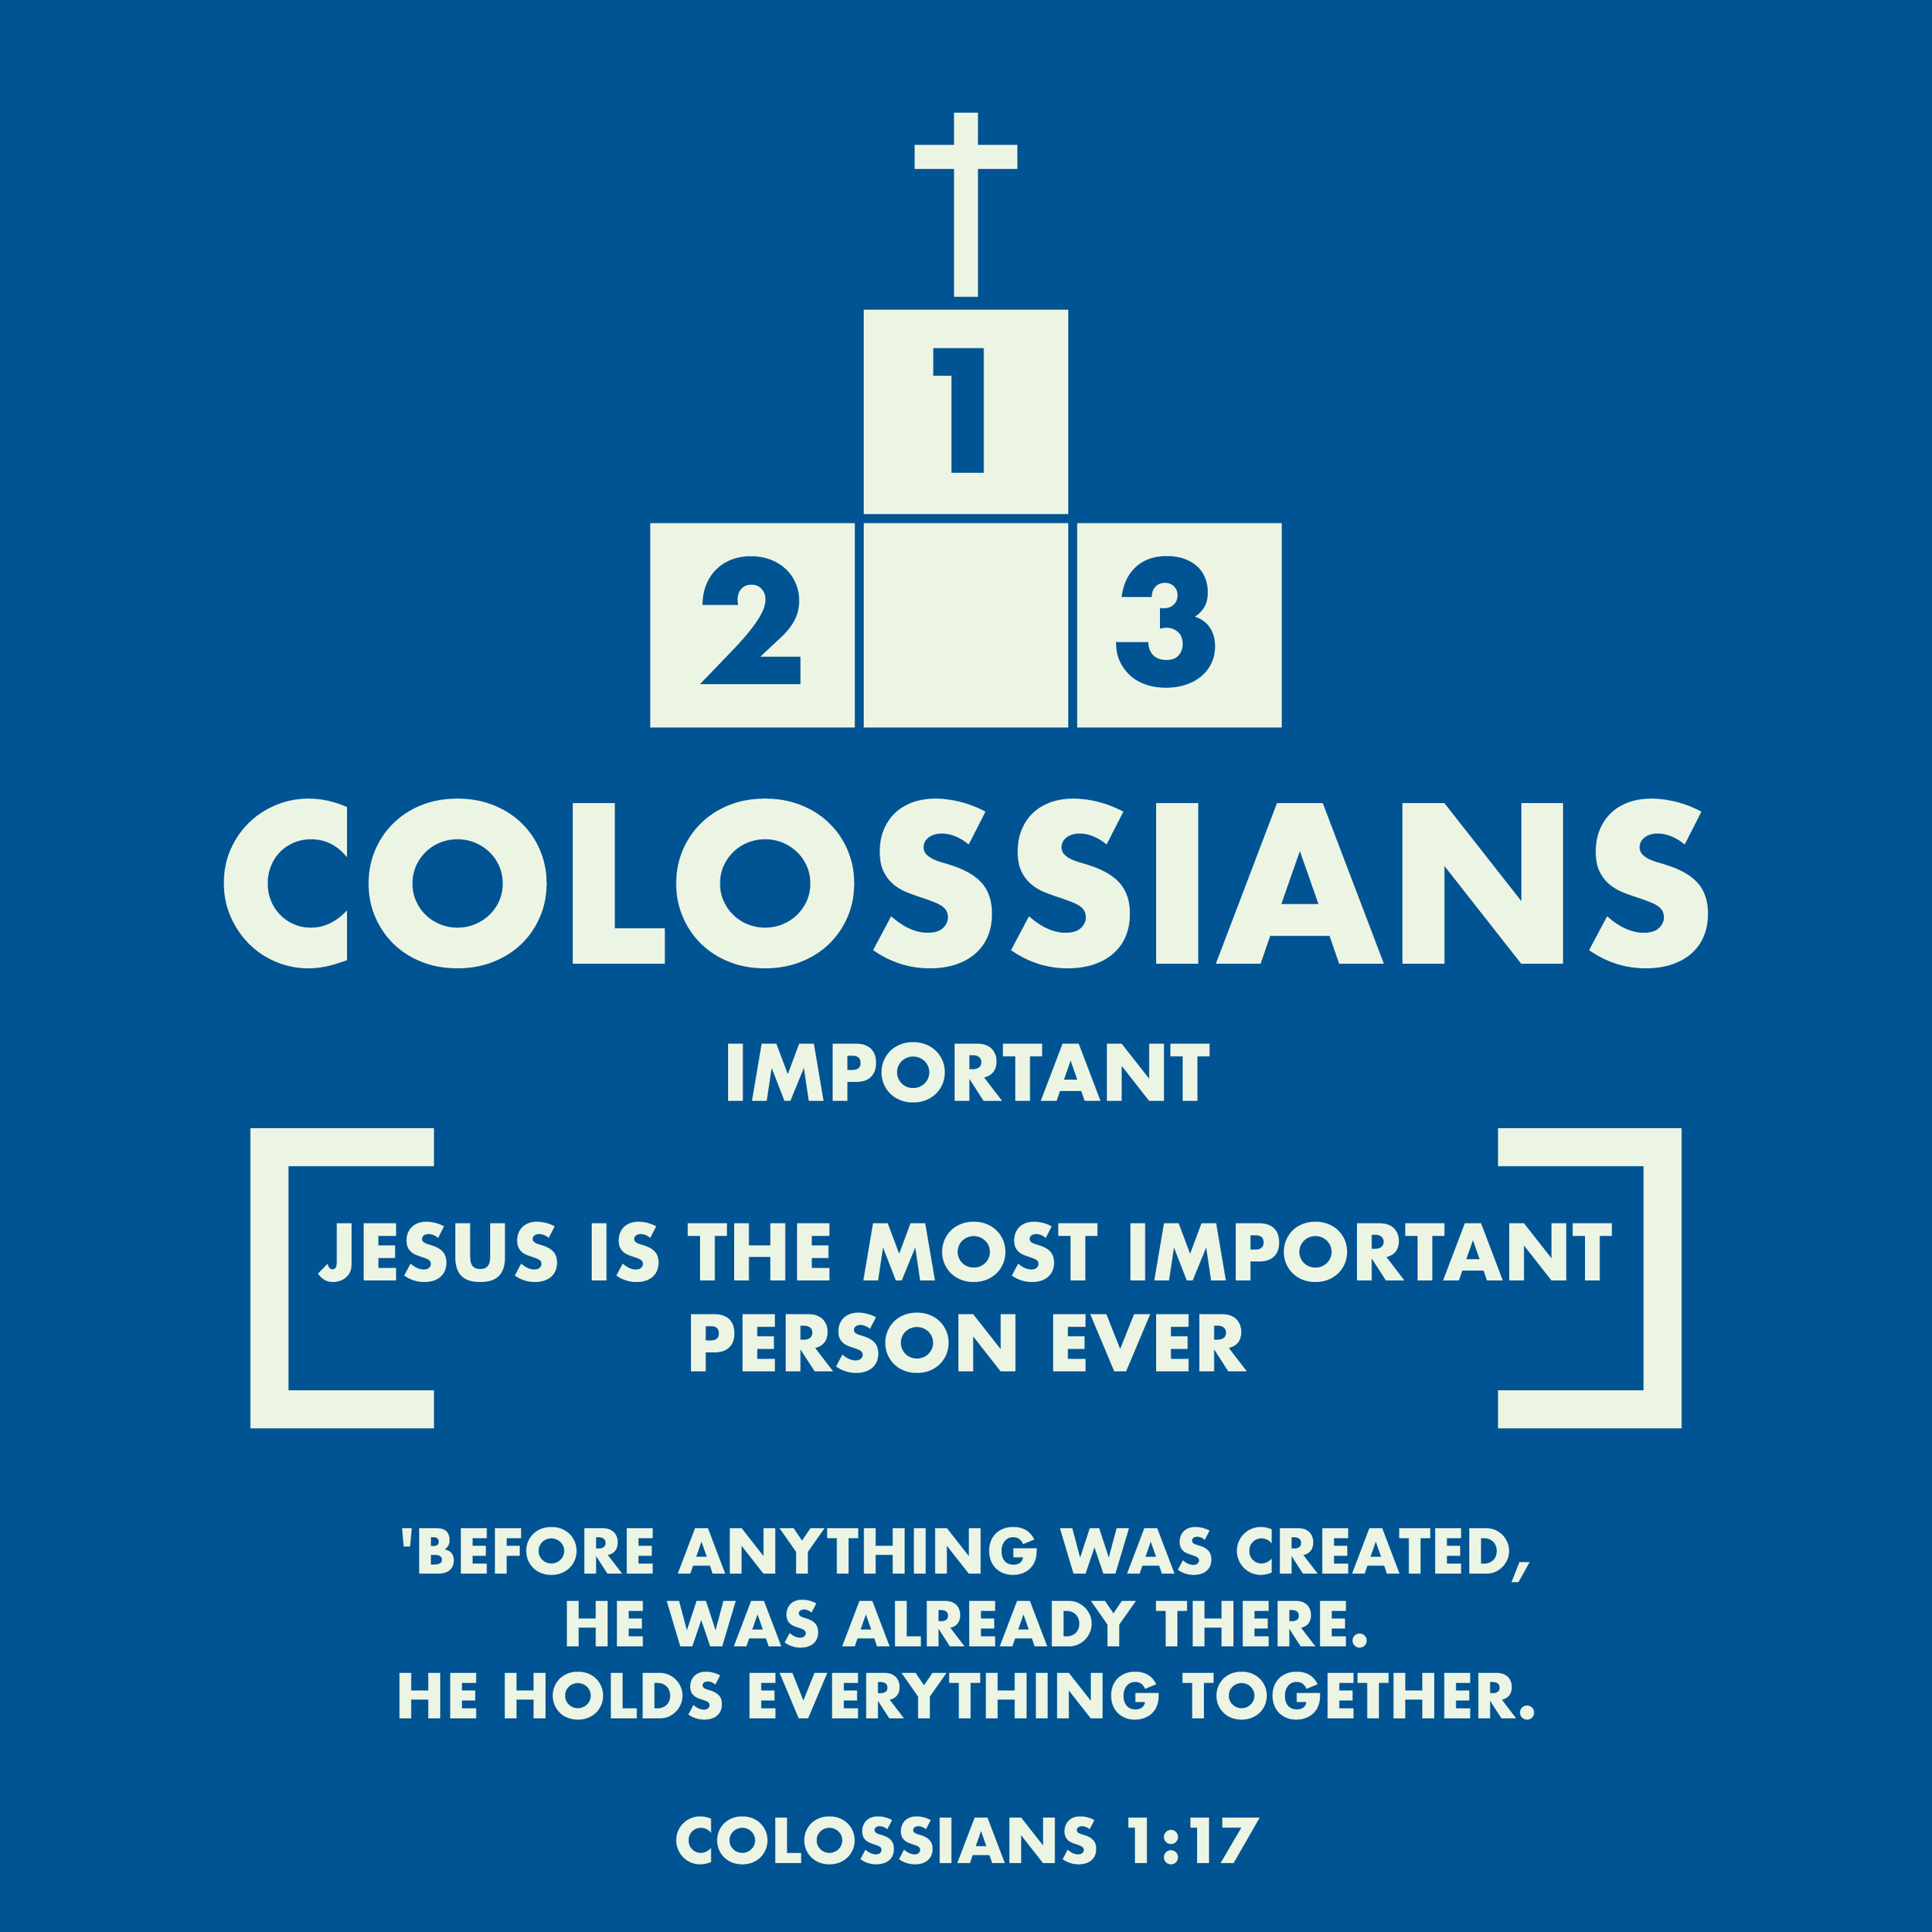 Books of the Bible_posters_49 Colossians.png